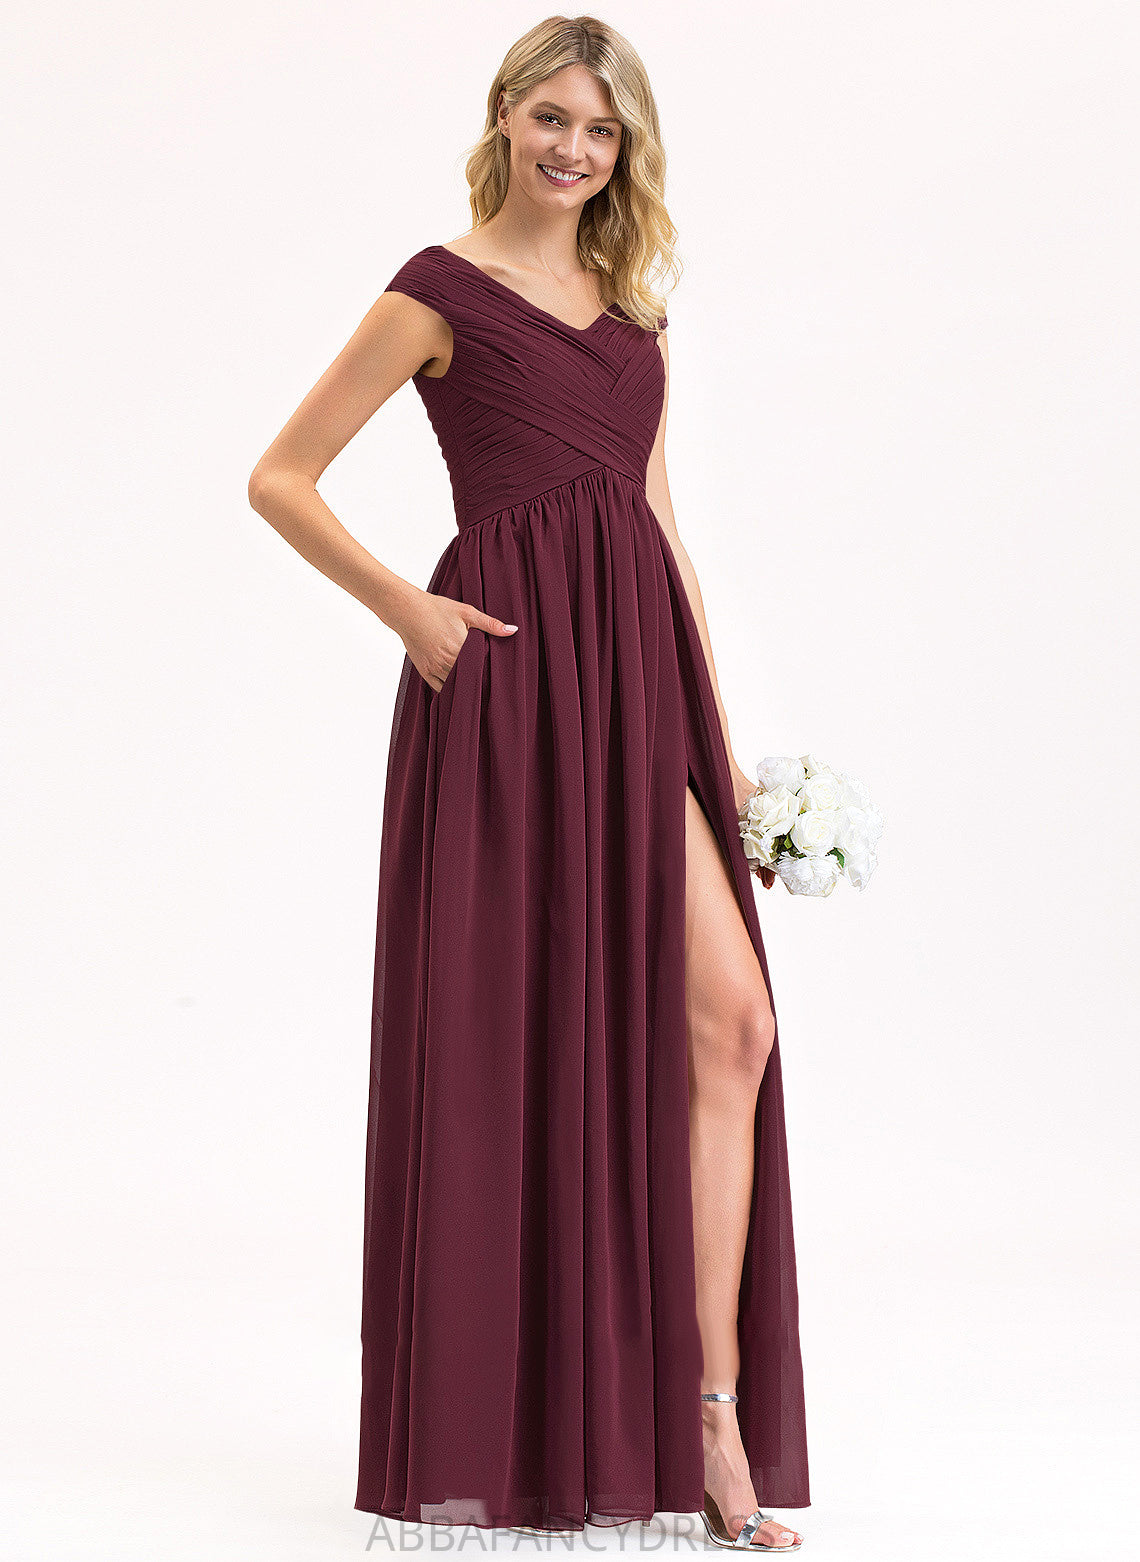 Pockets Chiffon Ruffle Floor-Length Off-the-Shoulder Angelina Prom Dresses Front A-Line Split With